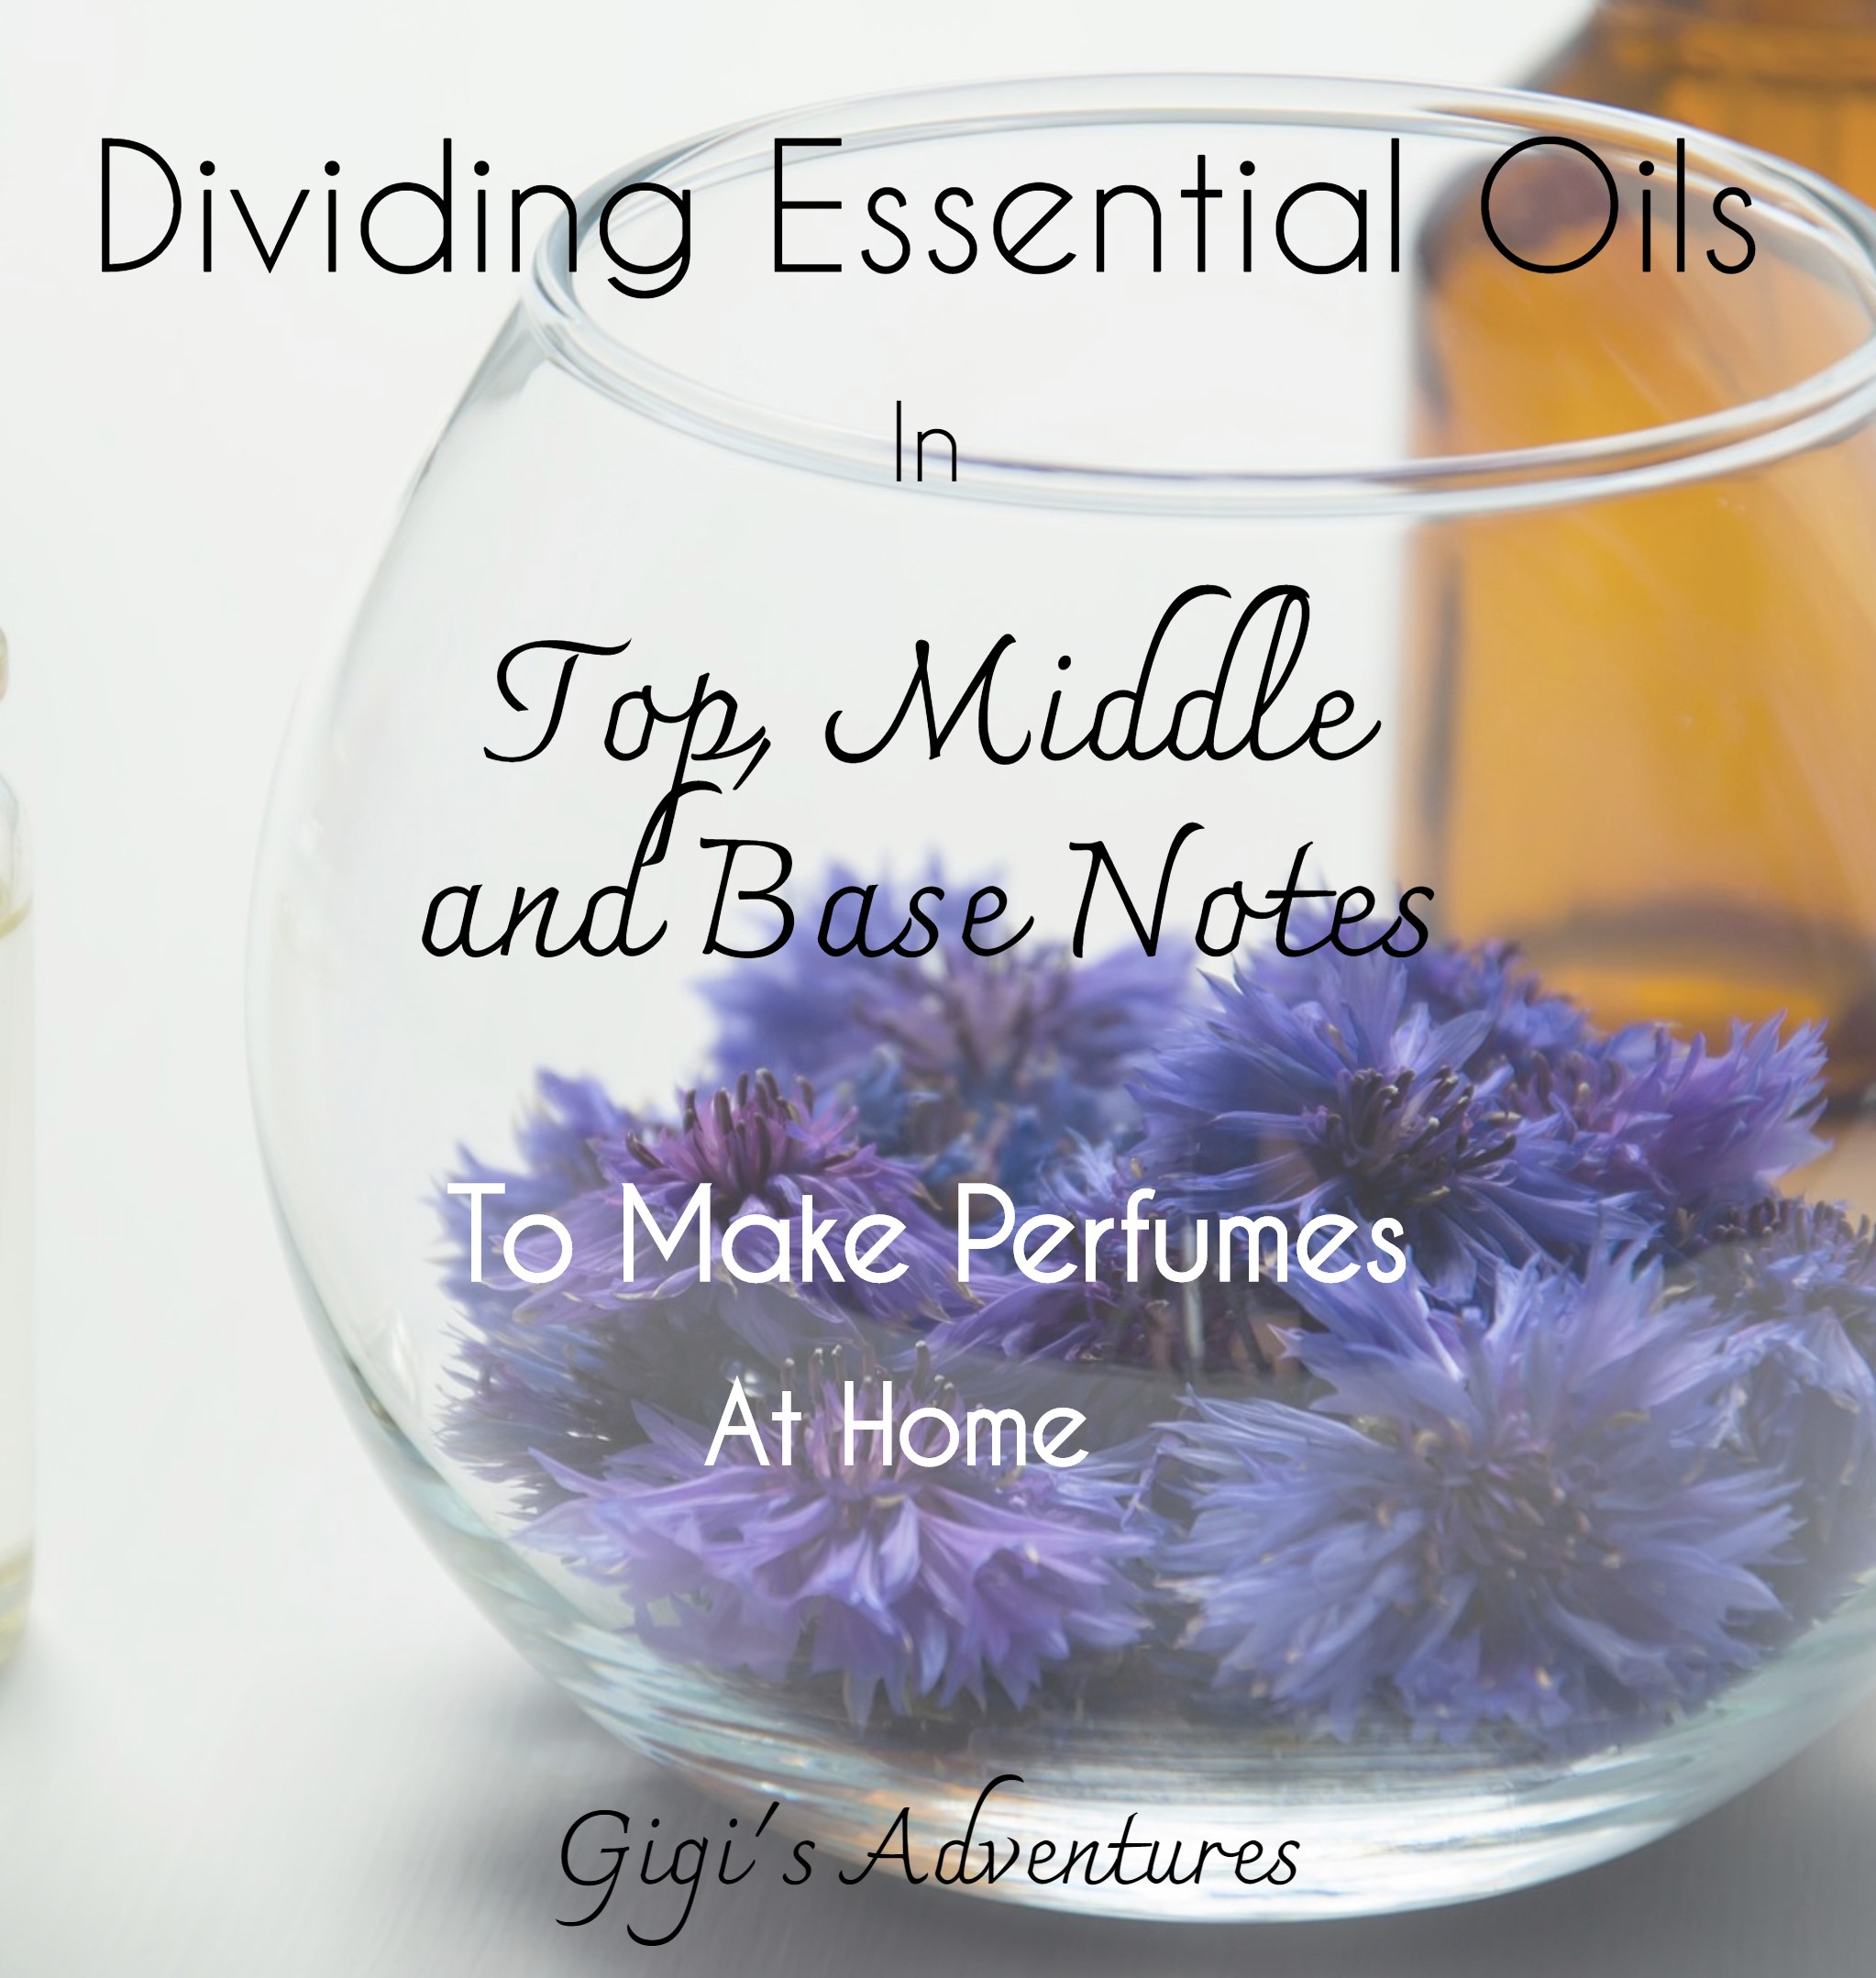 Dividing Essential Oils in Top, Middle and Base Notes to Make Perfumes At Home!